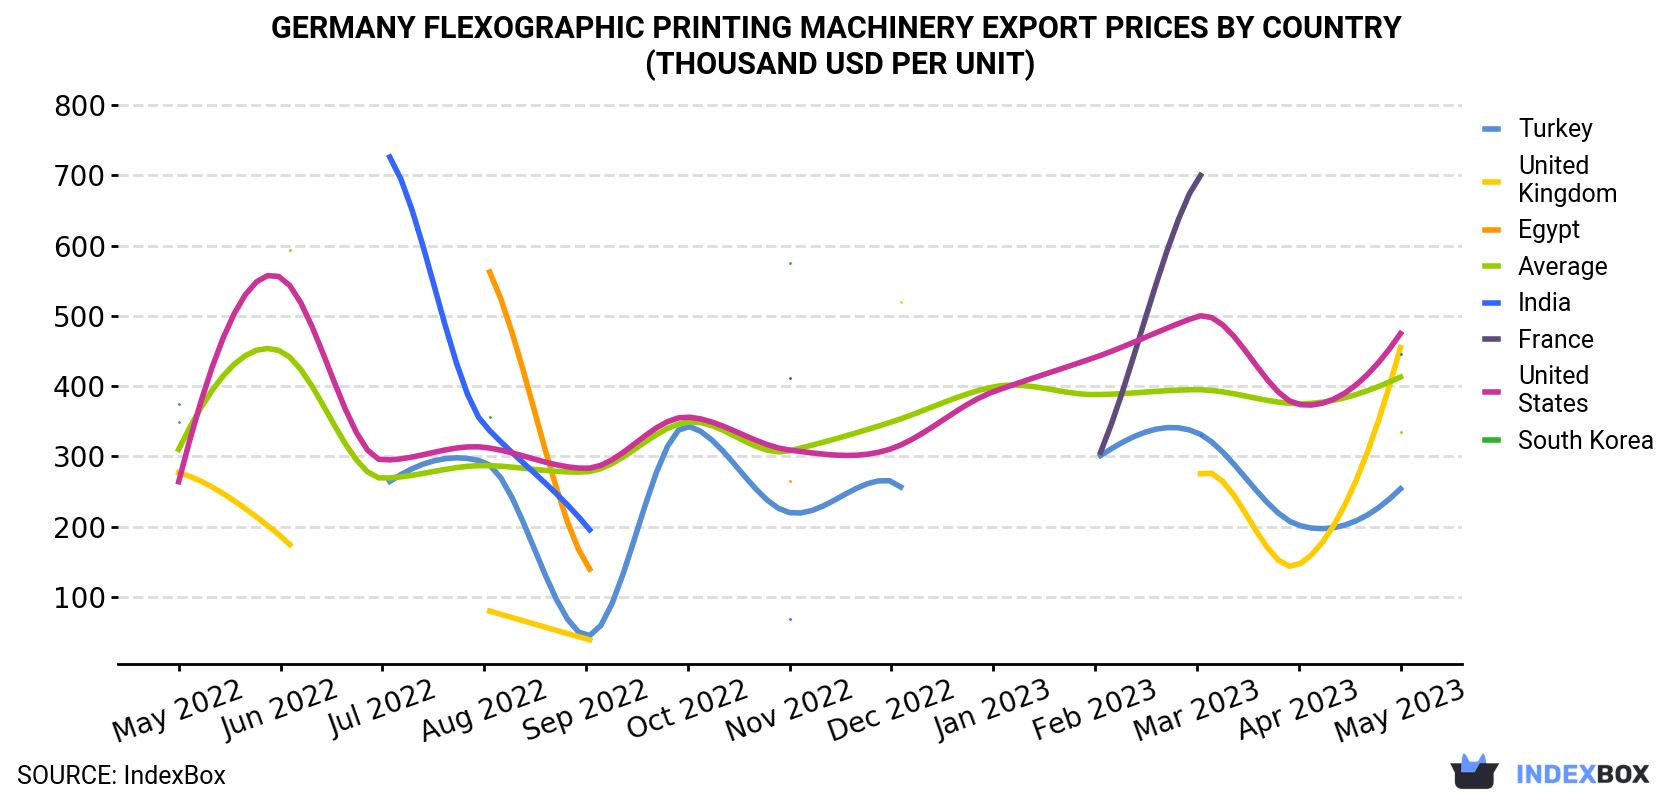 Germany Flexographic Printing Machinery Export Prices By Country (Thousand USD Per Unit)